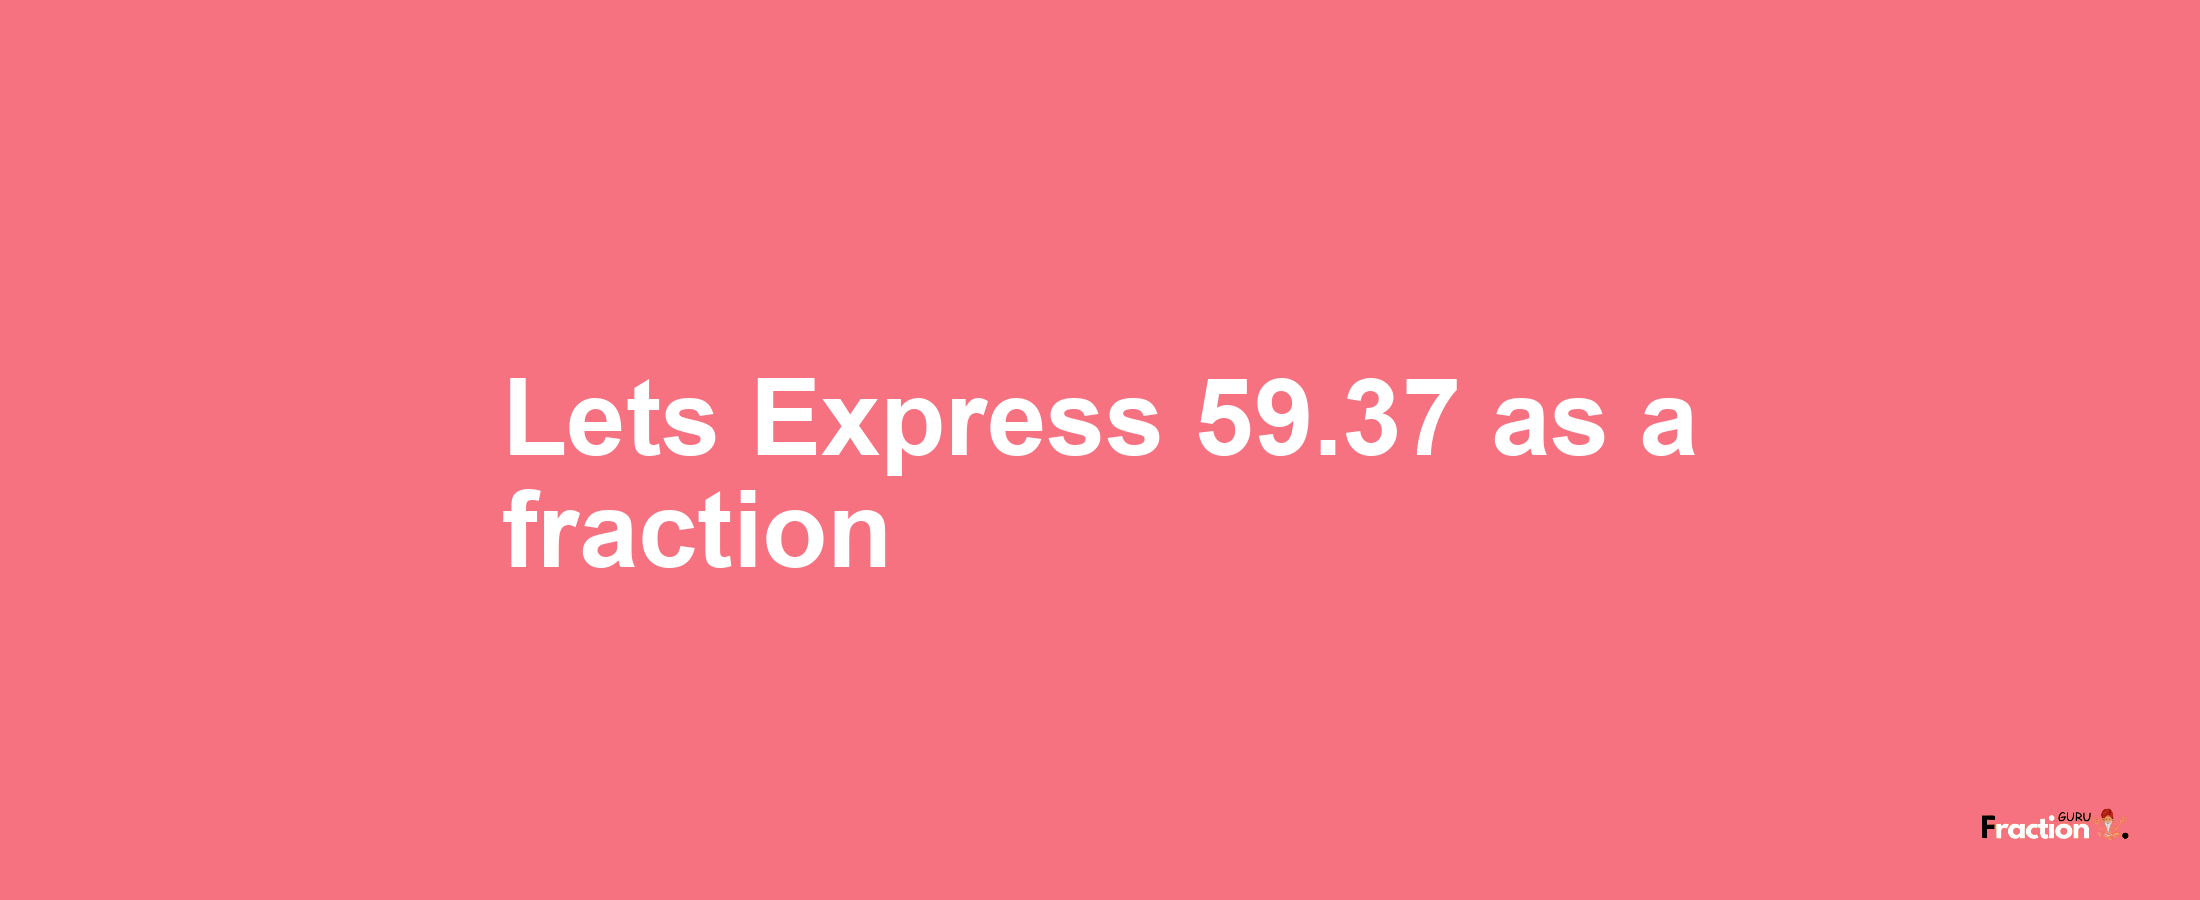 Lets Express 59.37 as afraction